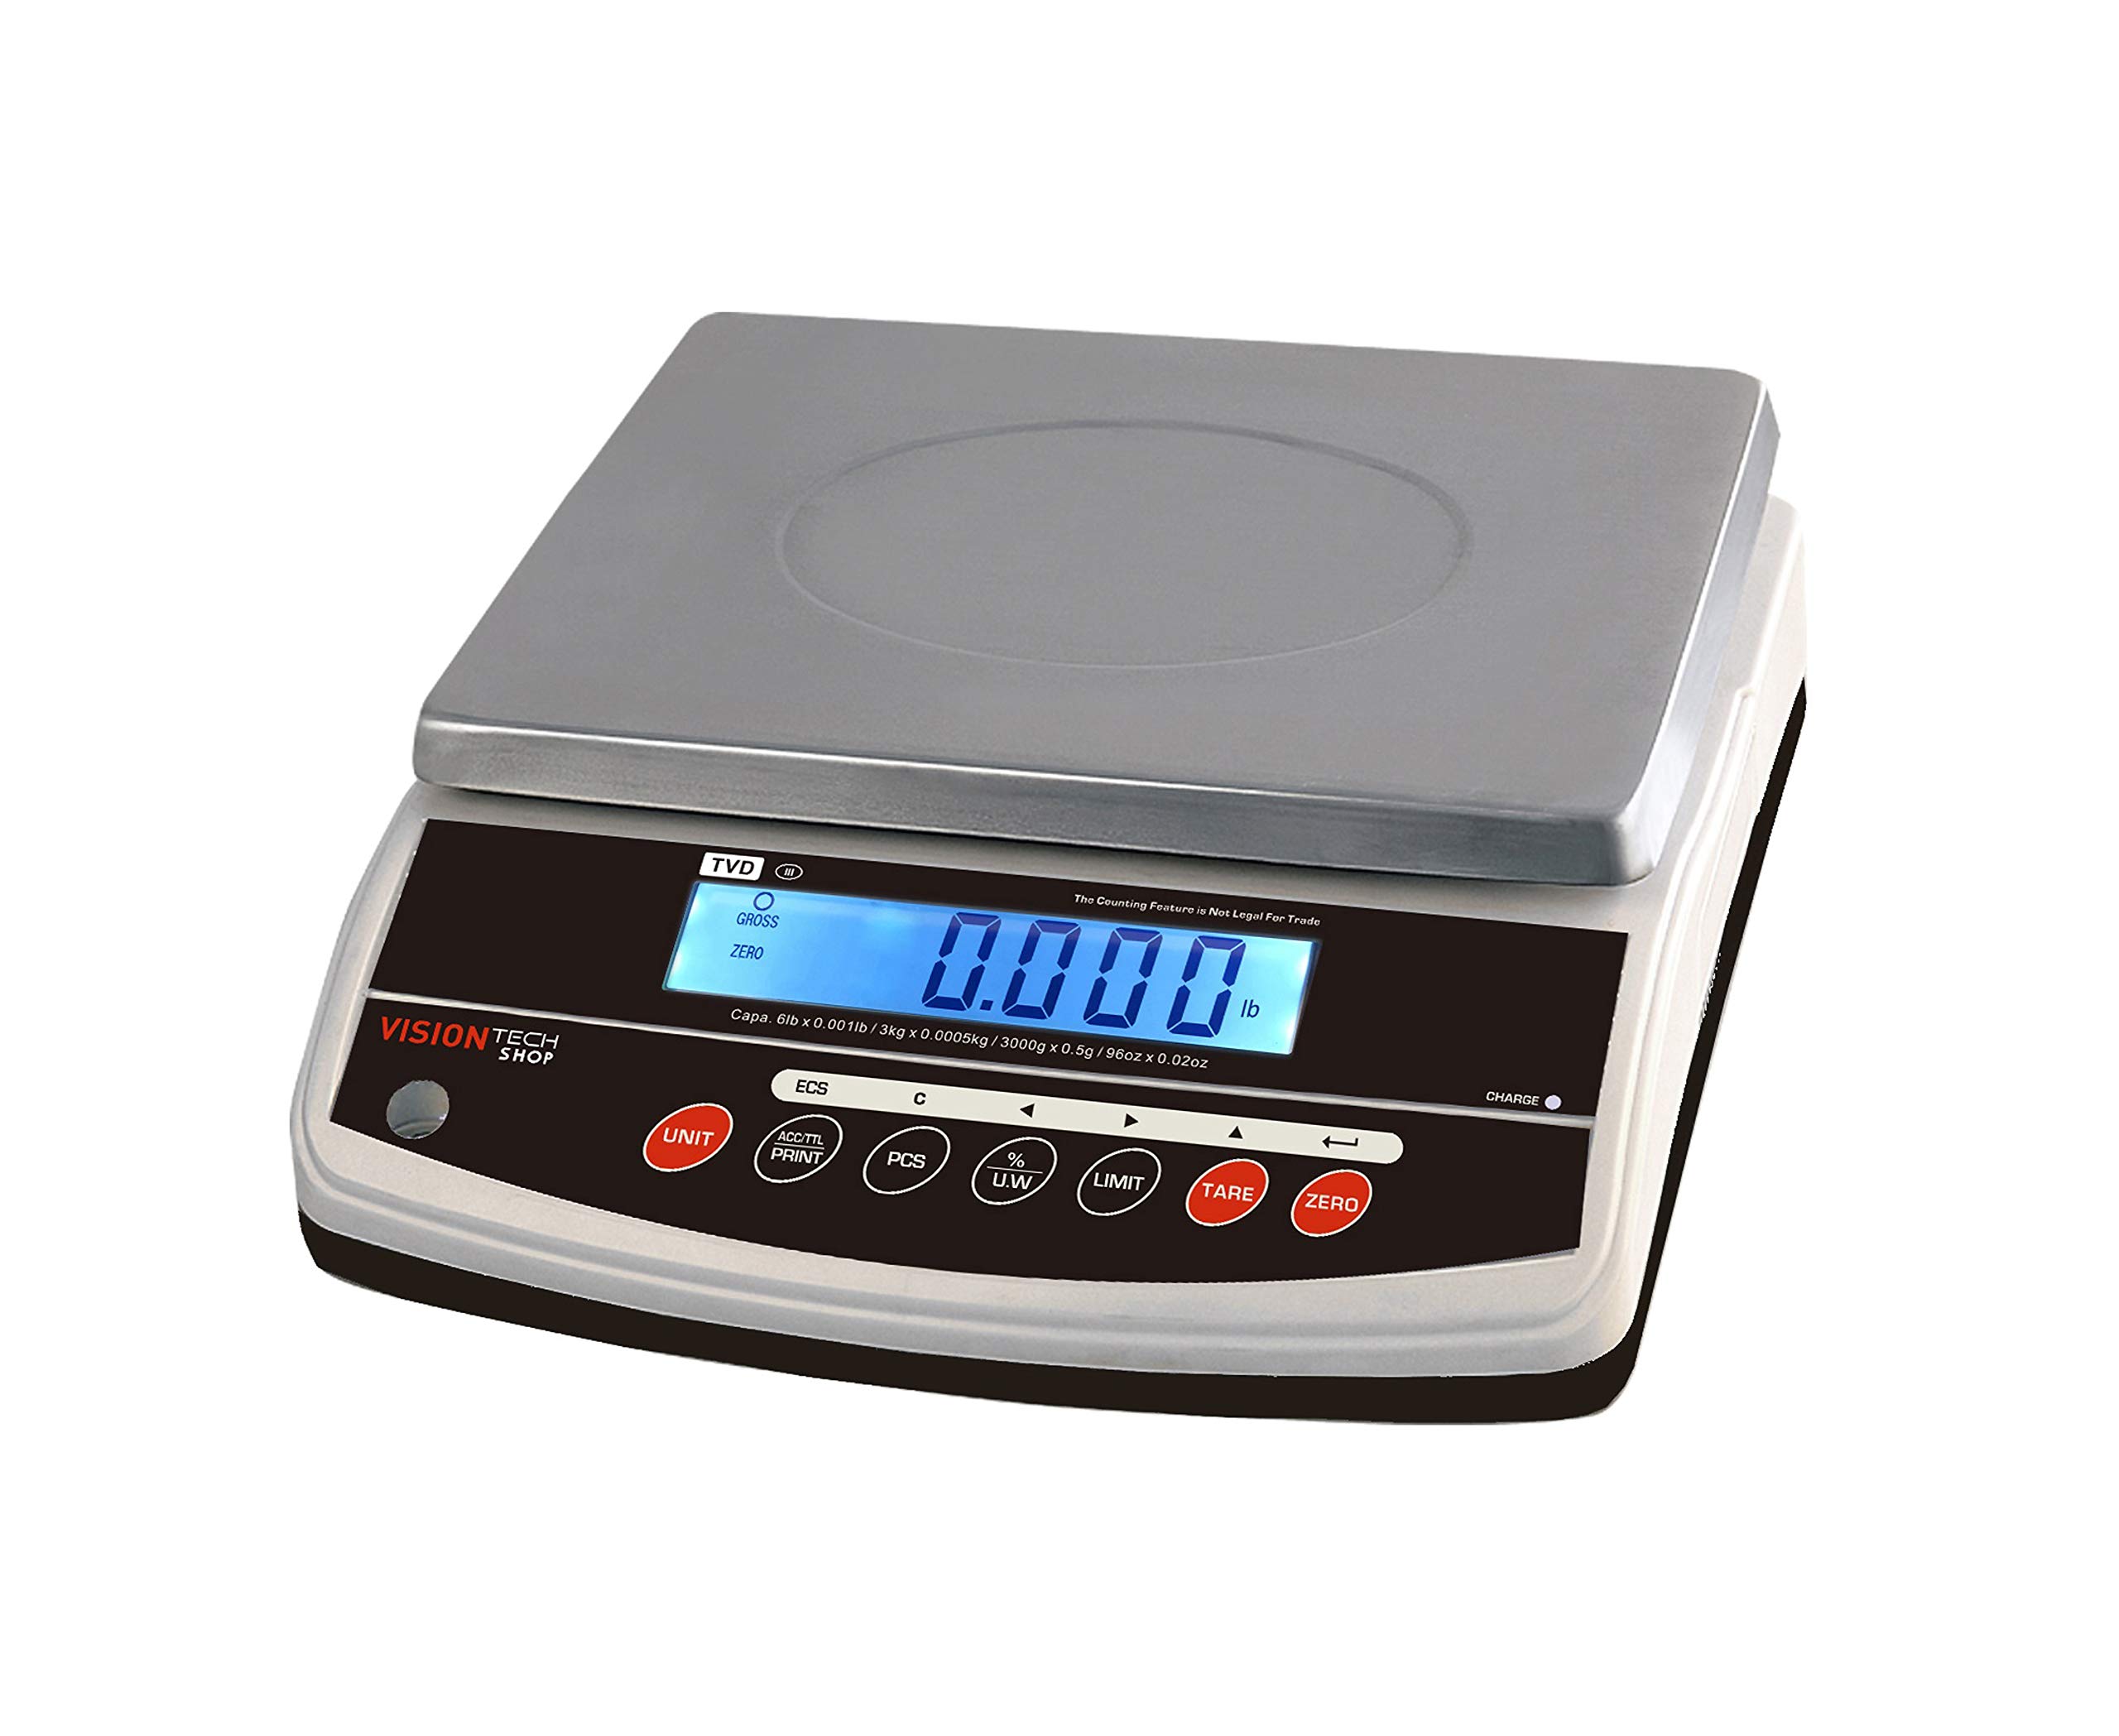 VisionTechShop TVD-6 Digital Bench and Counter Scale, Lb/Oz/Kg/g Switchable, 6lb Capacity, 0.001lb Readability, Counting and Percentage Mode, Singl...